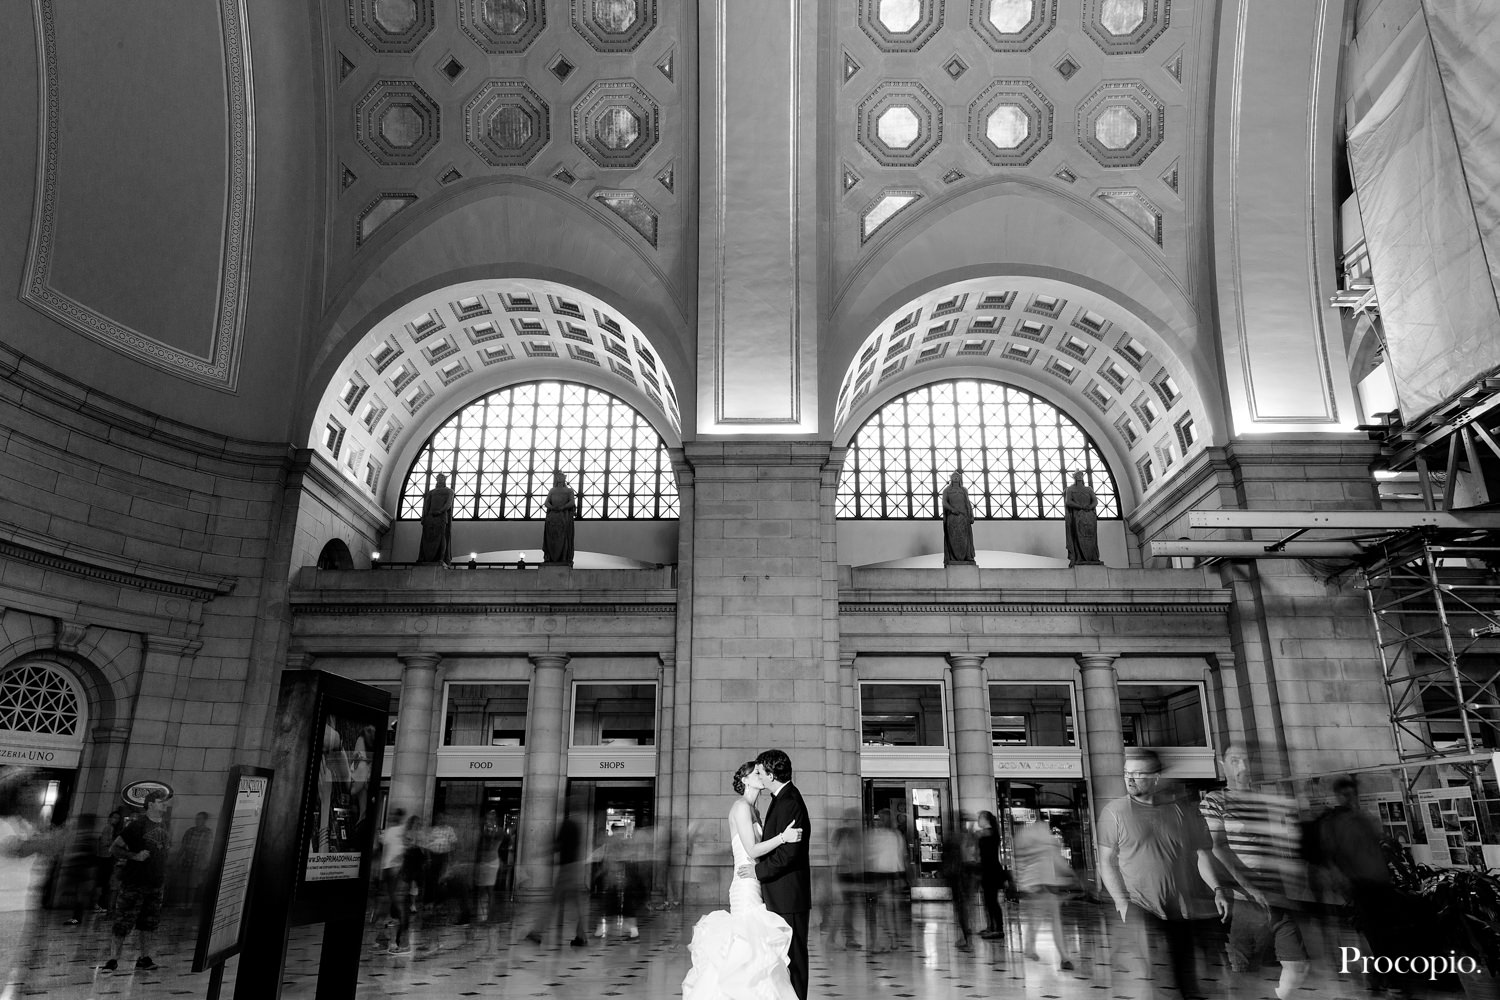 Union Station wedding reception, St John’s Church, Washington DC, wedding colors are purple deep red, and pink, striped wedding gown, Procopio Photography, best top Washington DC photographer, best top Maryland photographer, best top Virginia photographer, best top DMV photographer, best top wedding photographer, best top commercial photographer, best top portrait photographer, best top boudoir photographer, modern fine art portraits, dramatic, unique, different, bold, editorial, photojournalism, award winning photographer, published photographer, memorable images, be different, stand out